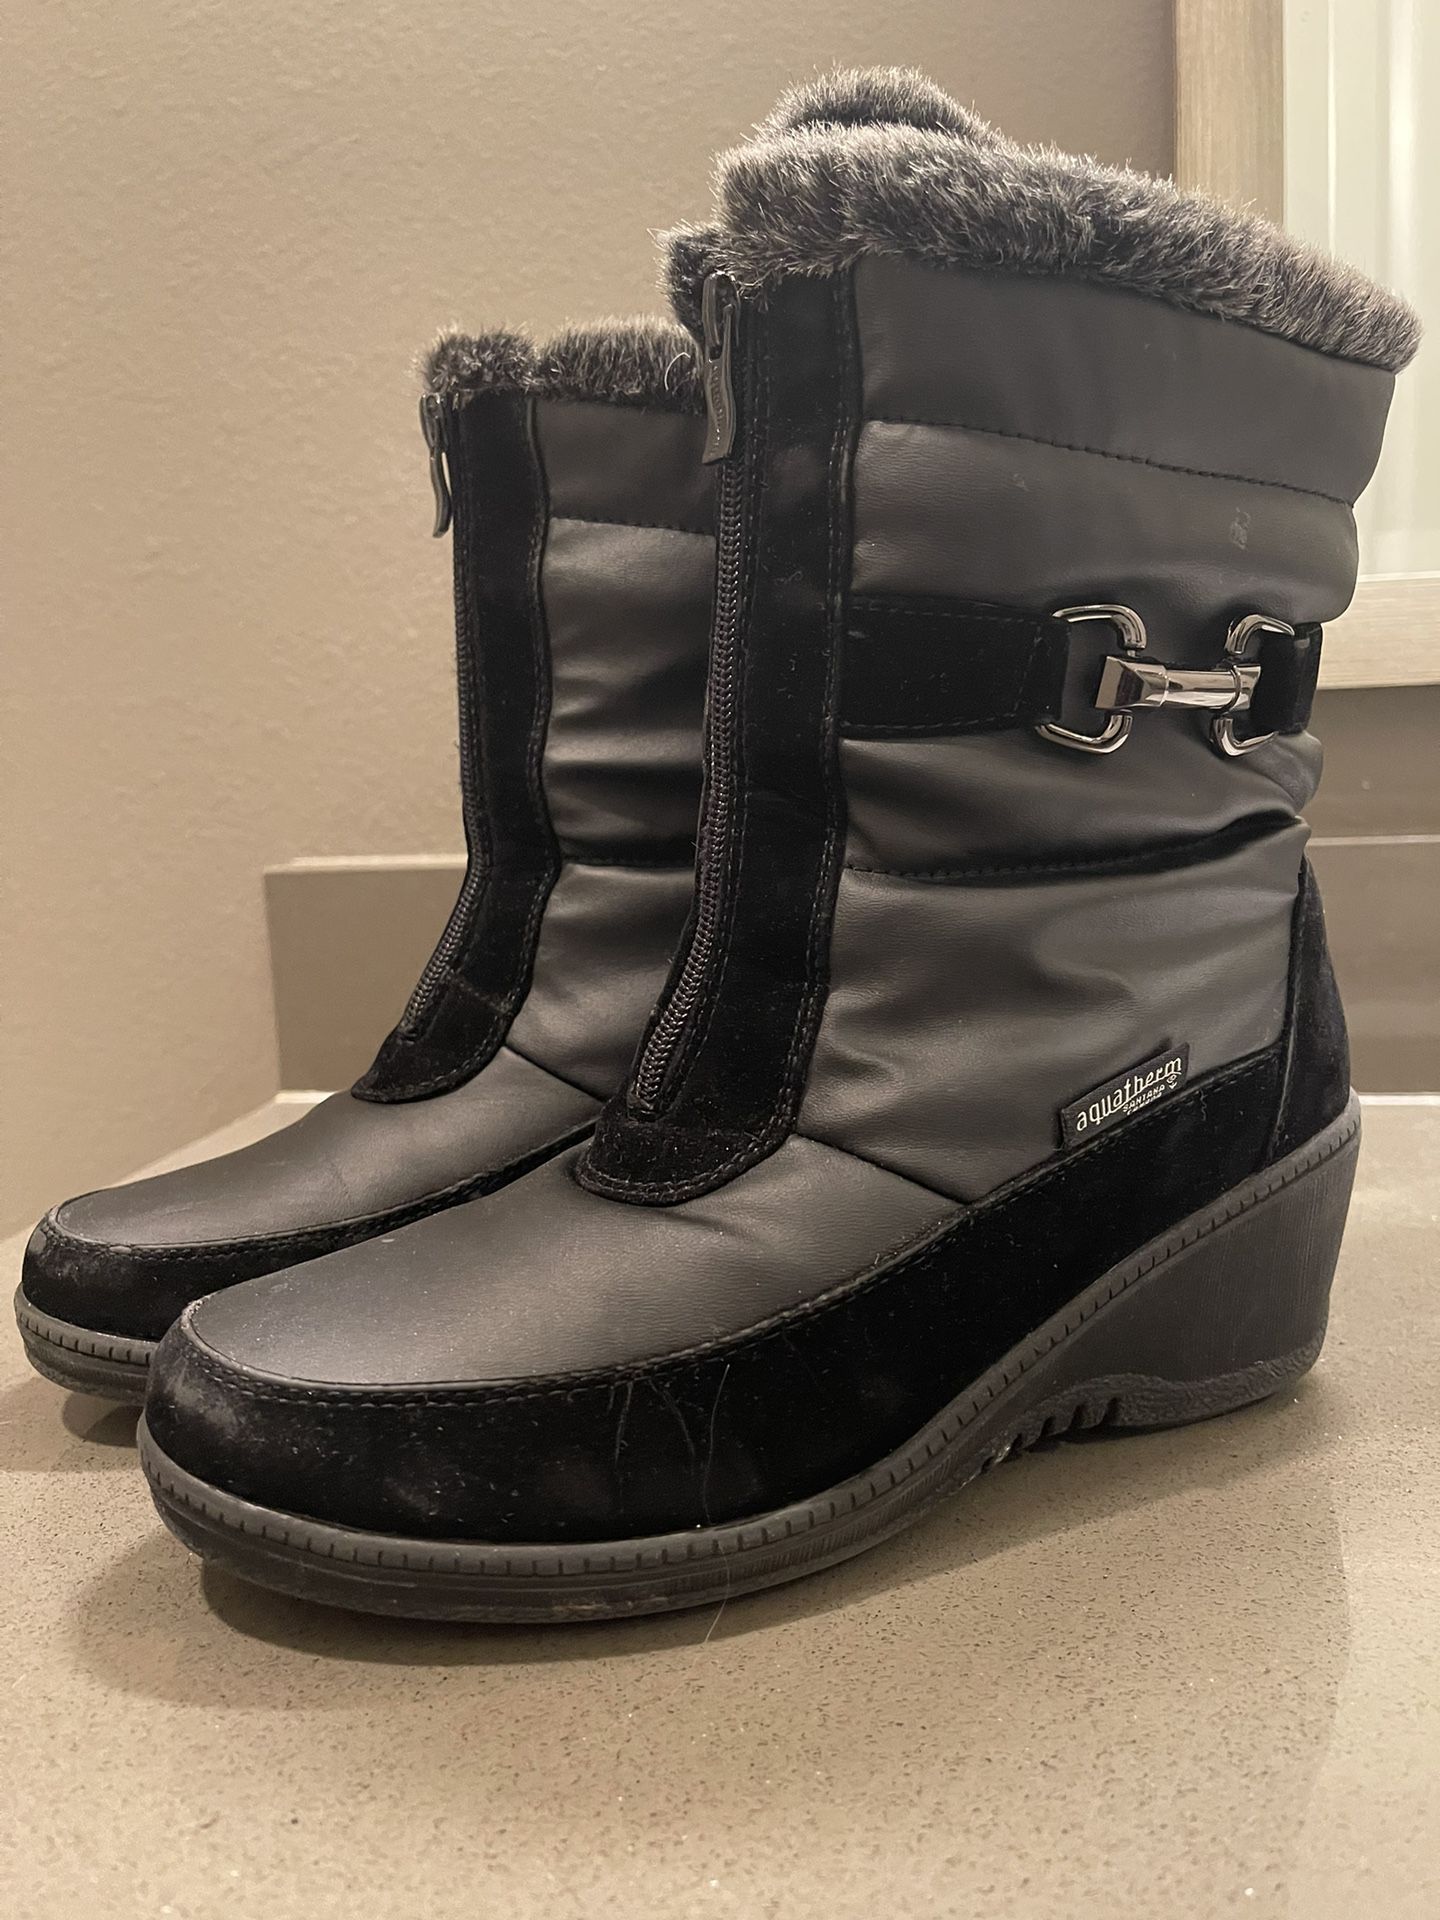 Faux Fur Lined winter/snow boots 7 Arch Support 